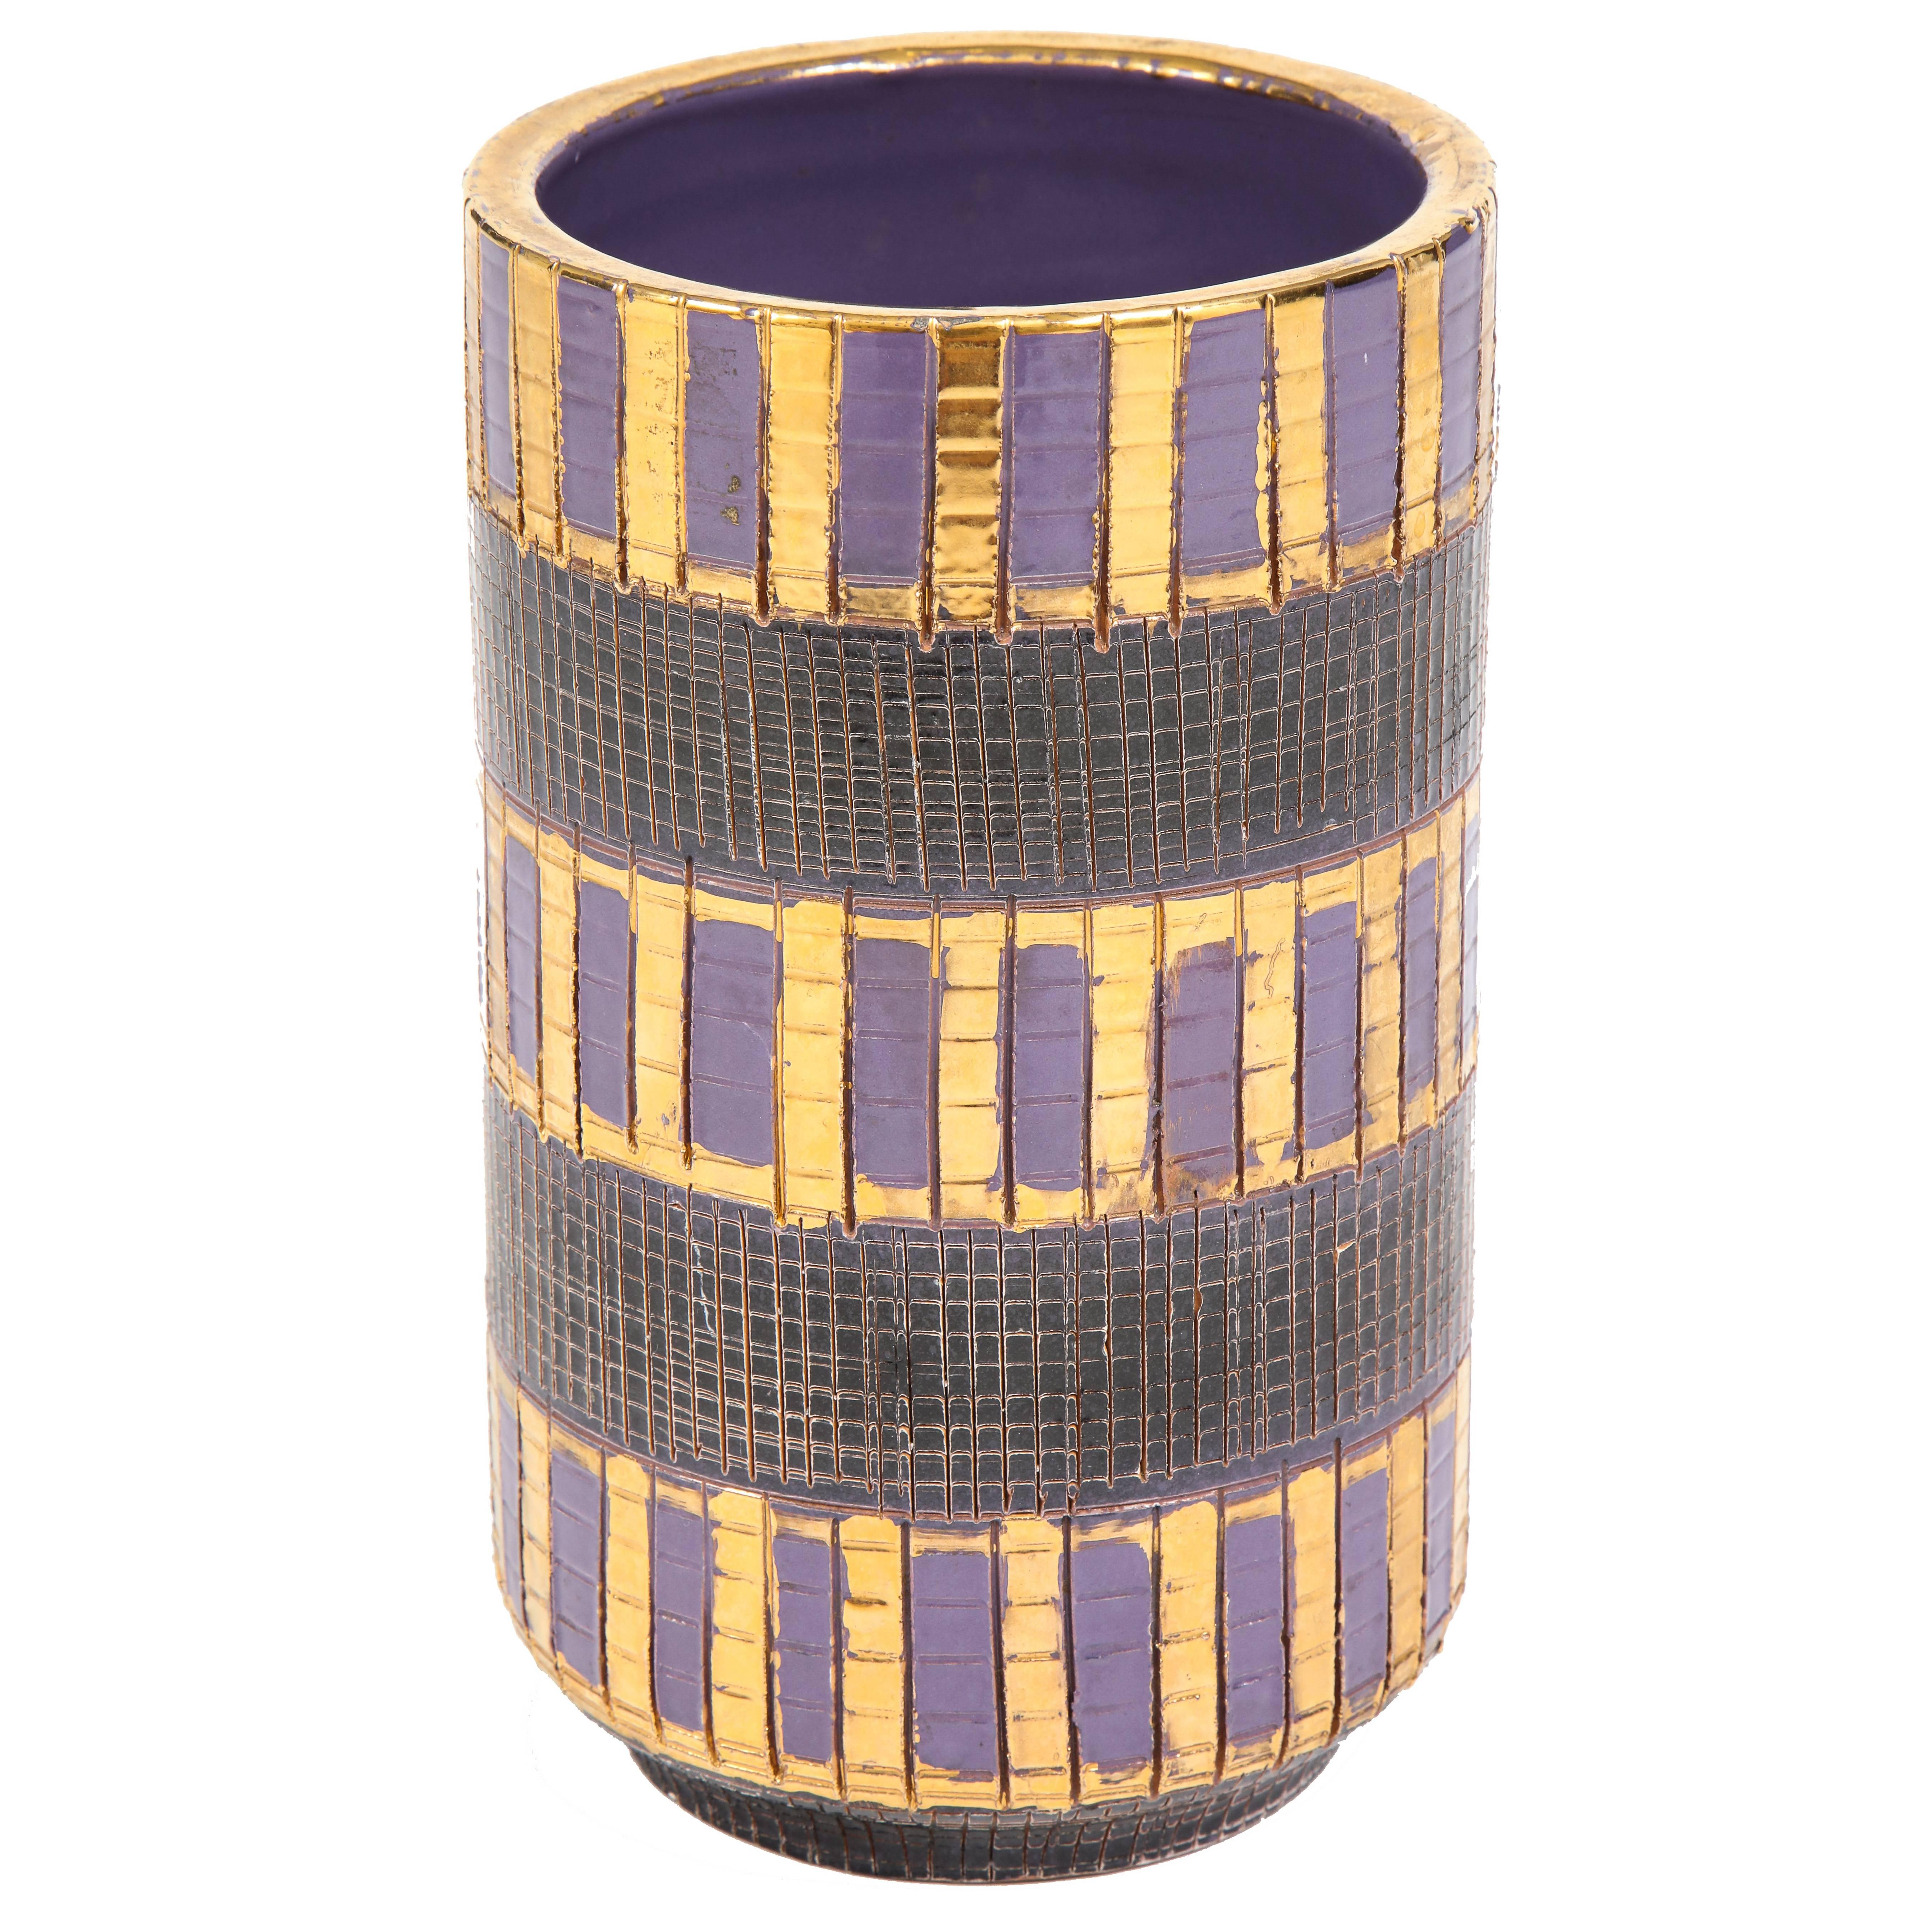 Aldo Londi Bitossi seta vase, ceramic, gold, purple and black, signed. Medium scale chunky vase with black glazed sgraffito sections combined with patterns of alternating gold and purple bands. Vase tapers to a footed base. Signed on bottom of vase: